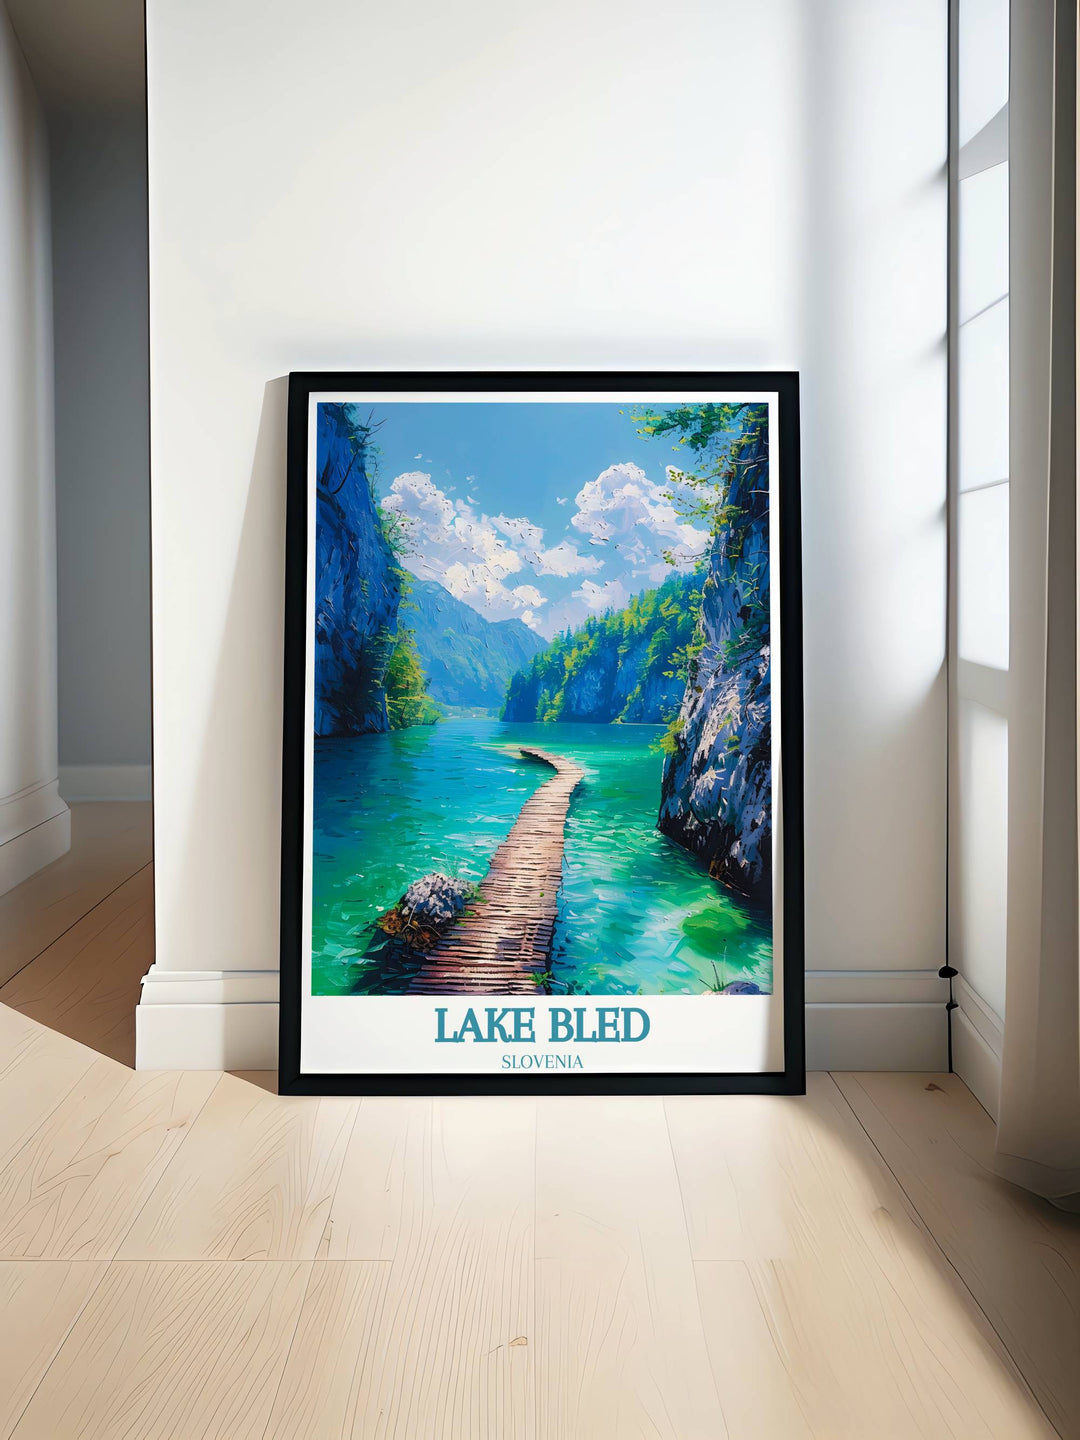 Stunning Lake Bled Travel Print featuring the serene waters and forested mountains ideal for bringing nature into your home decor